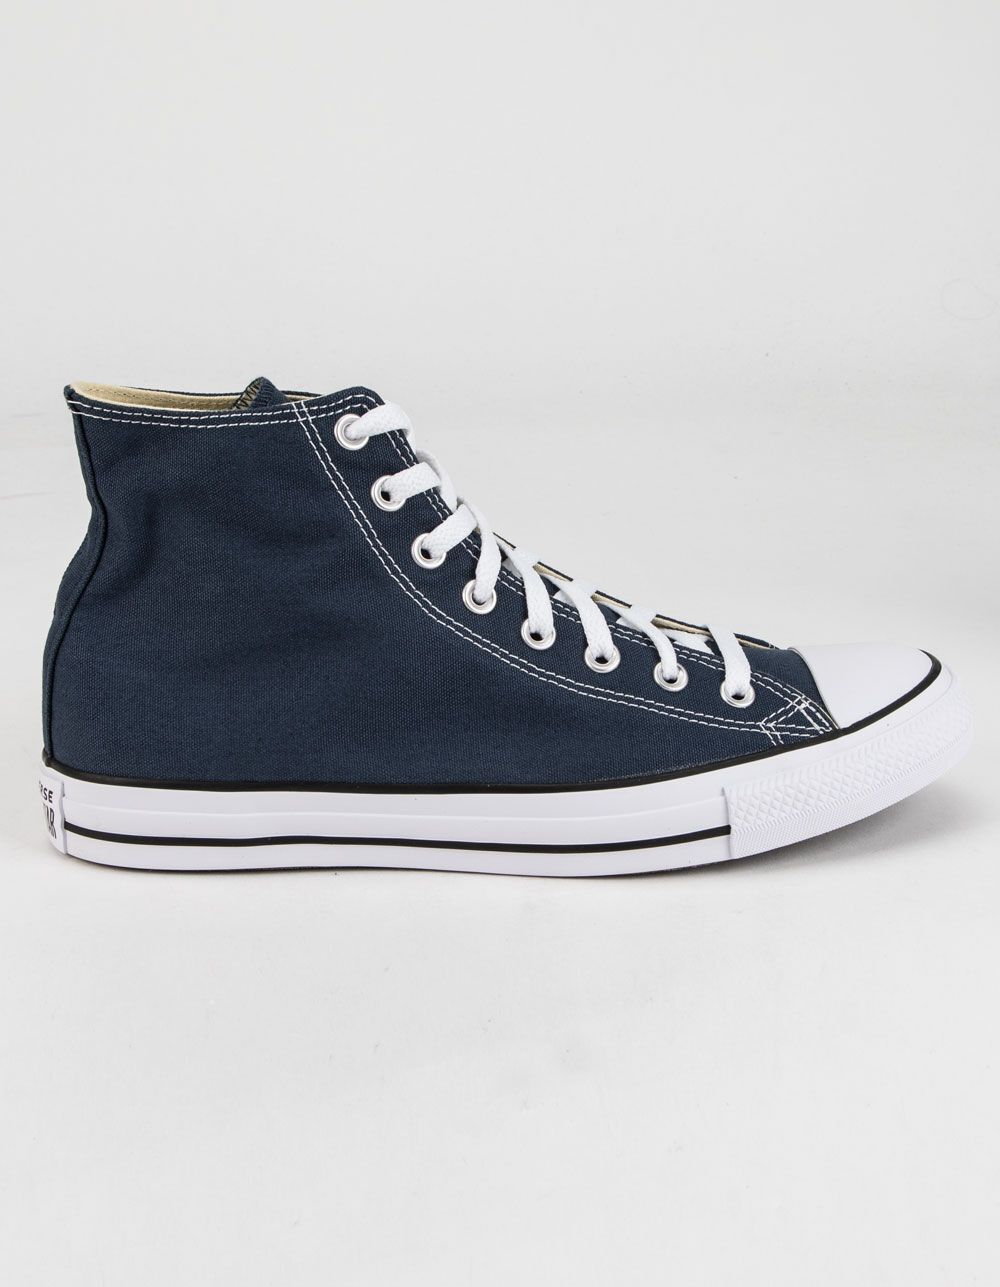  Converse Chuck Taylor All Star High Top Sneakers (13 M US  Women / 11 M US Men, Navy Blue/White)